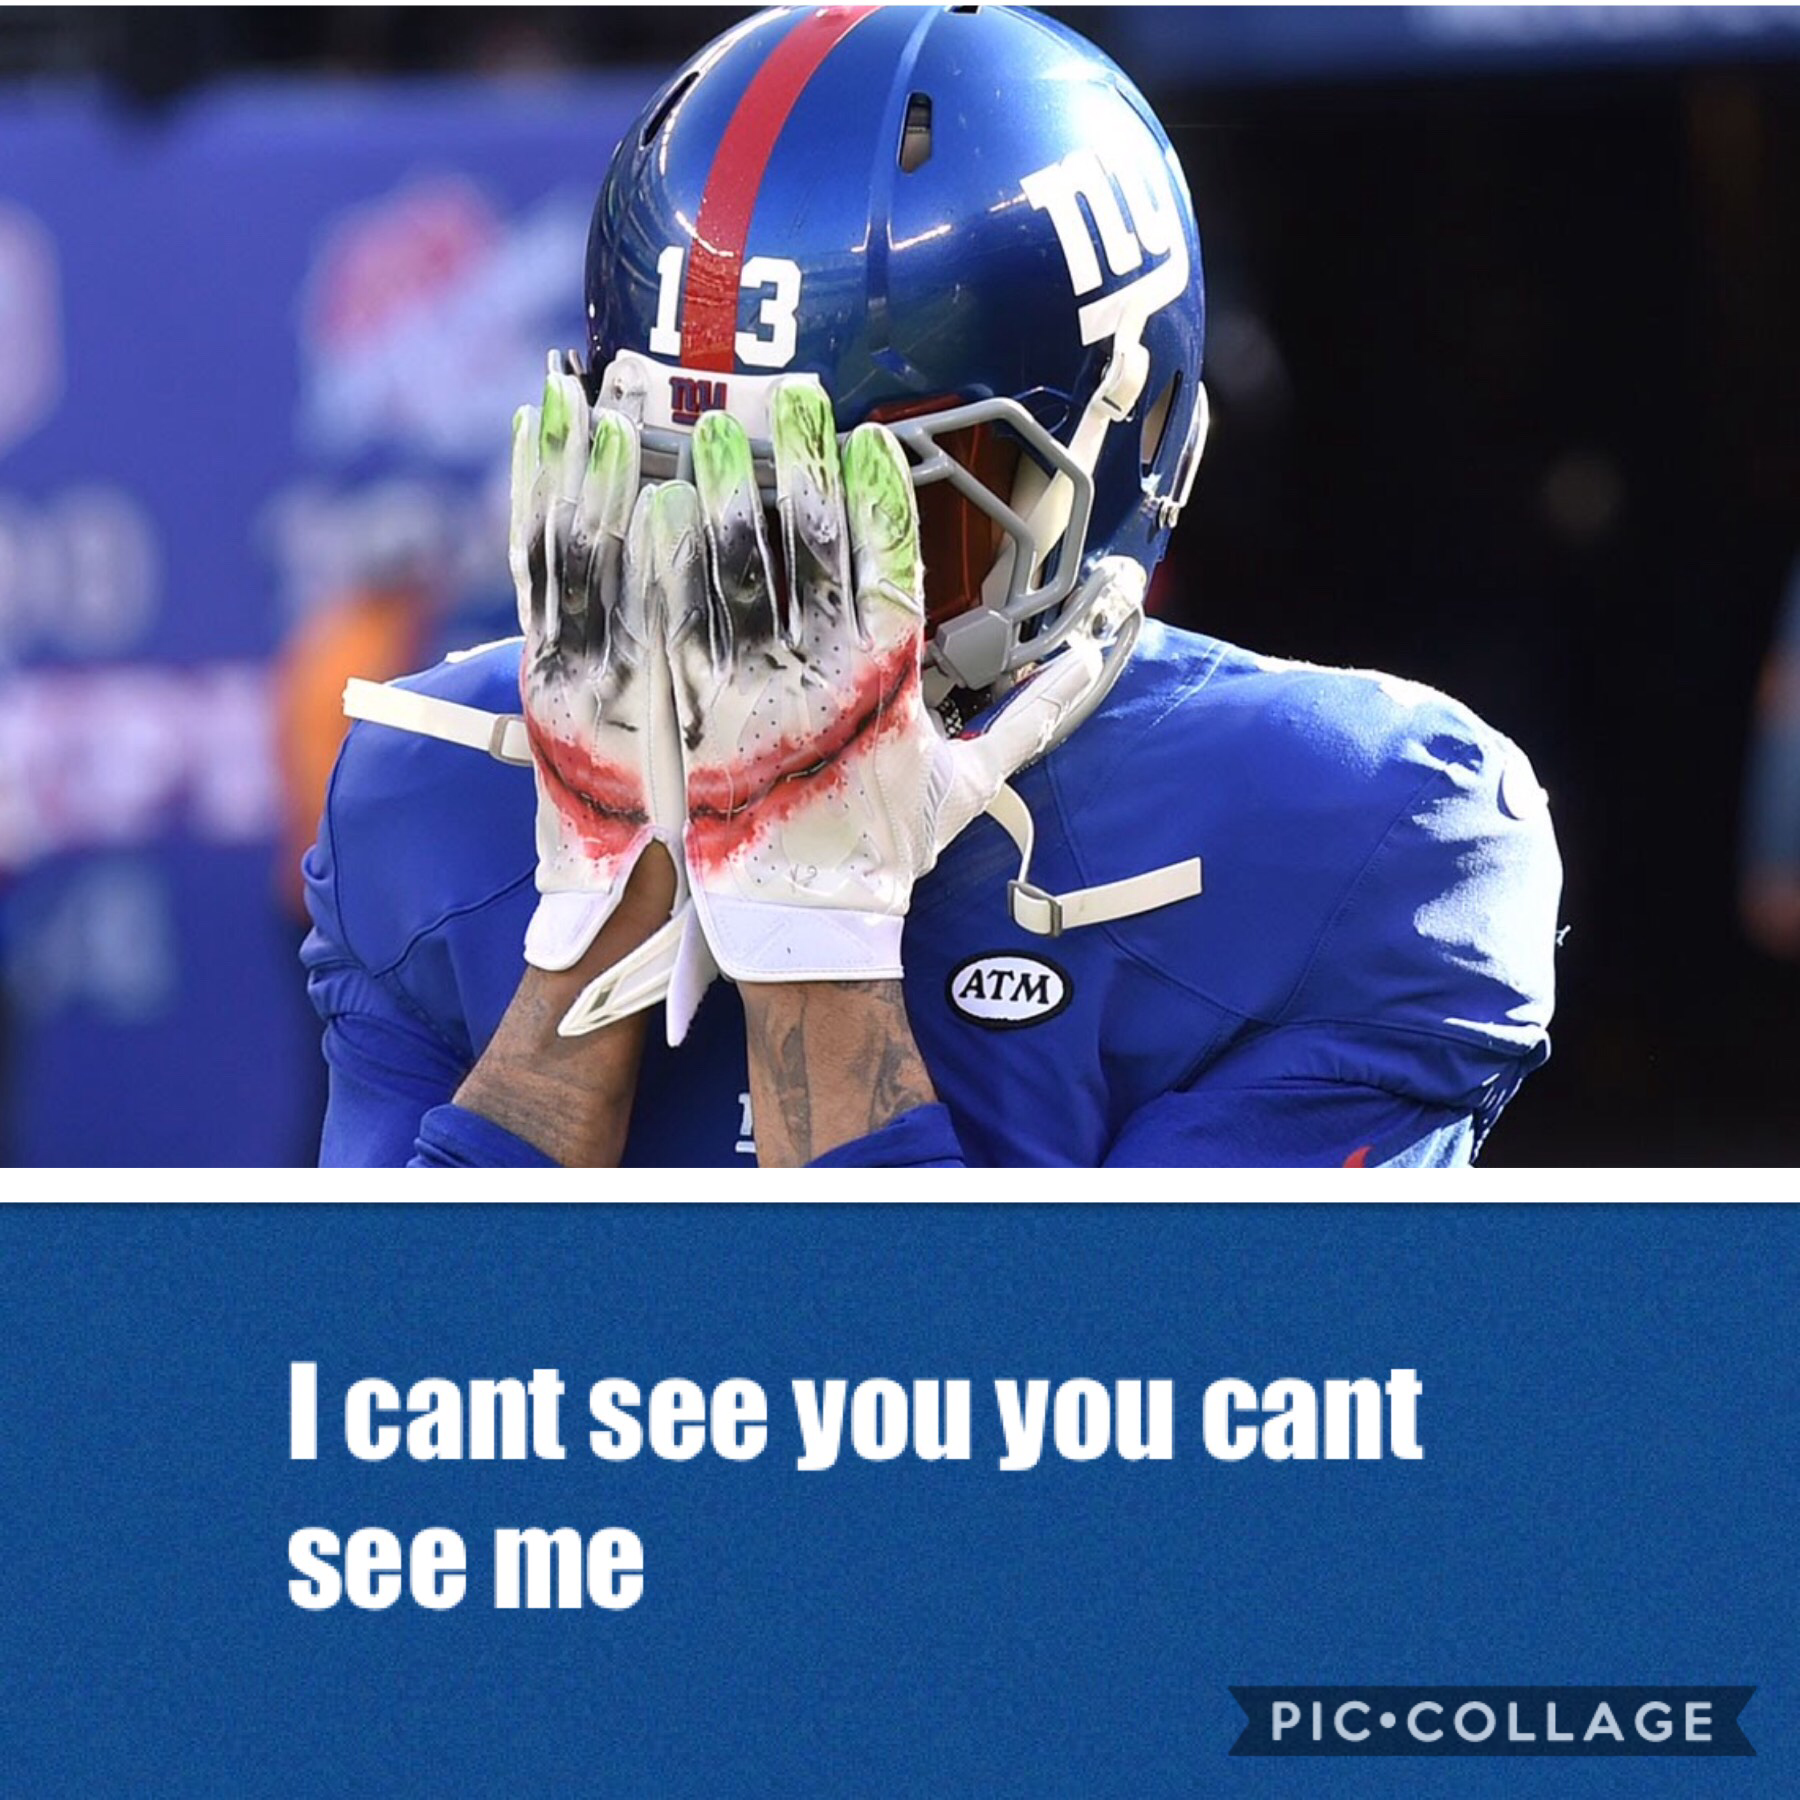 #I cant see you you cant see me!